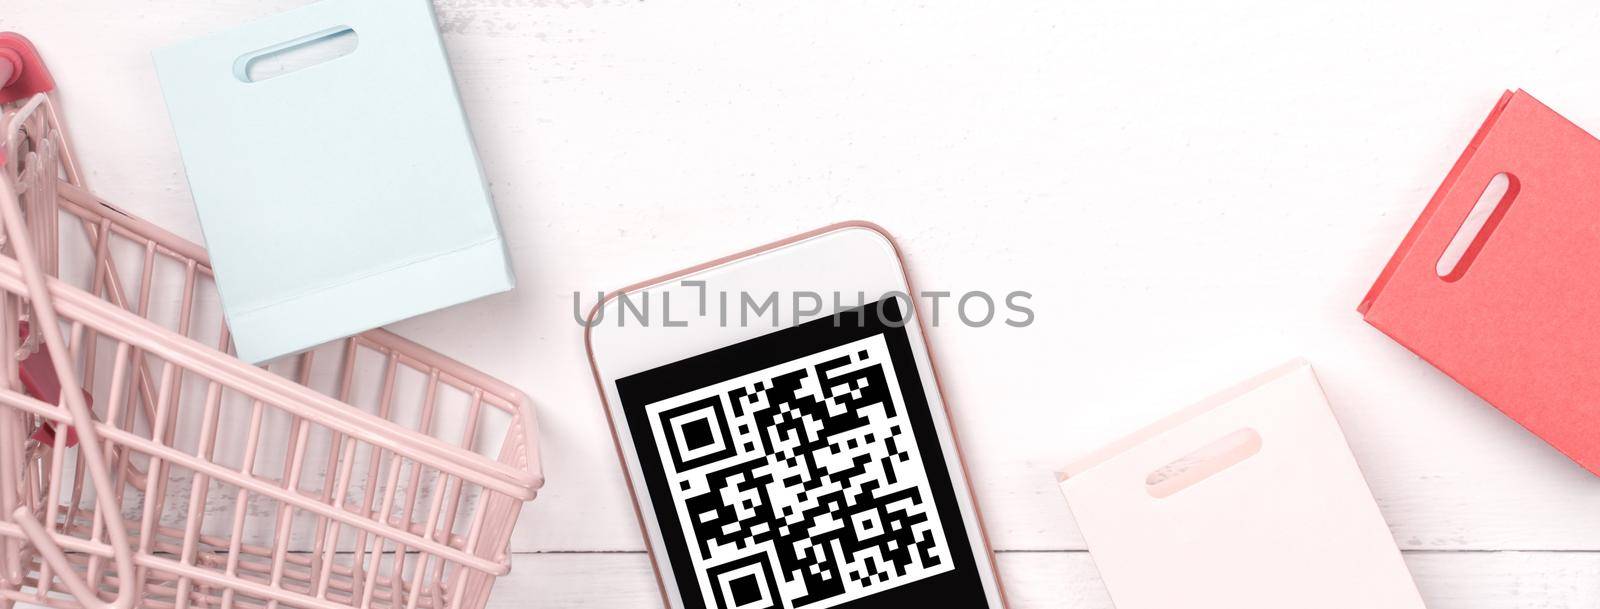 Abstract online shopping, mobile payment with QR code design concept element, colorful cart, paper bag on wooden table background, top view, flat lay by ROMIXIMAGE